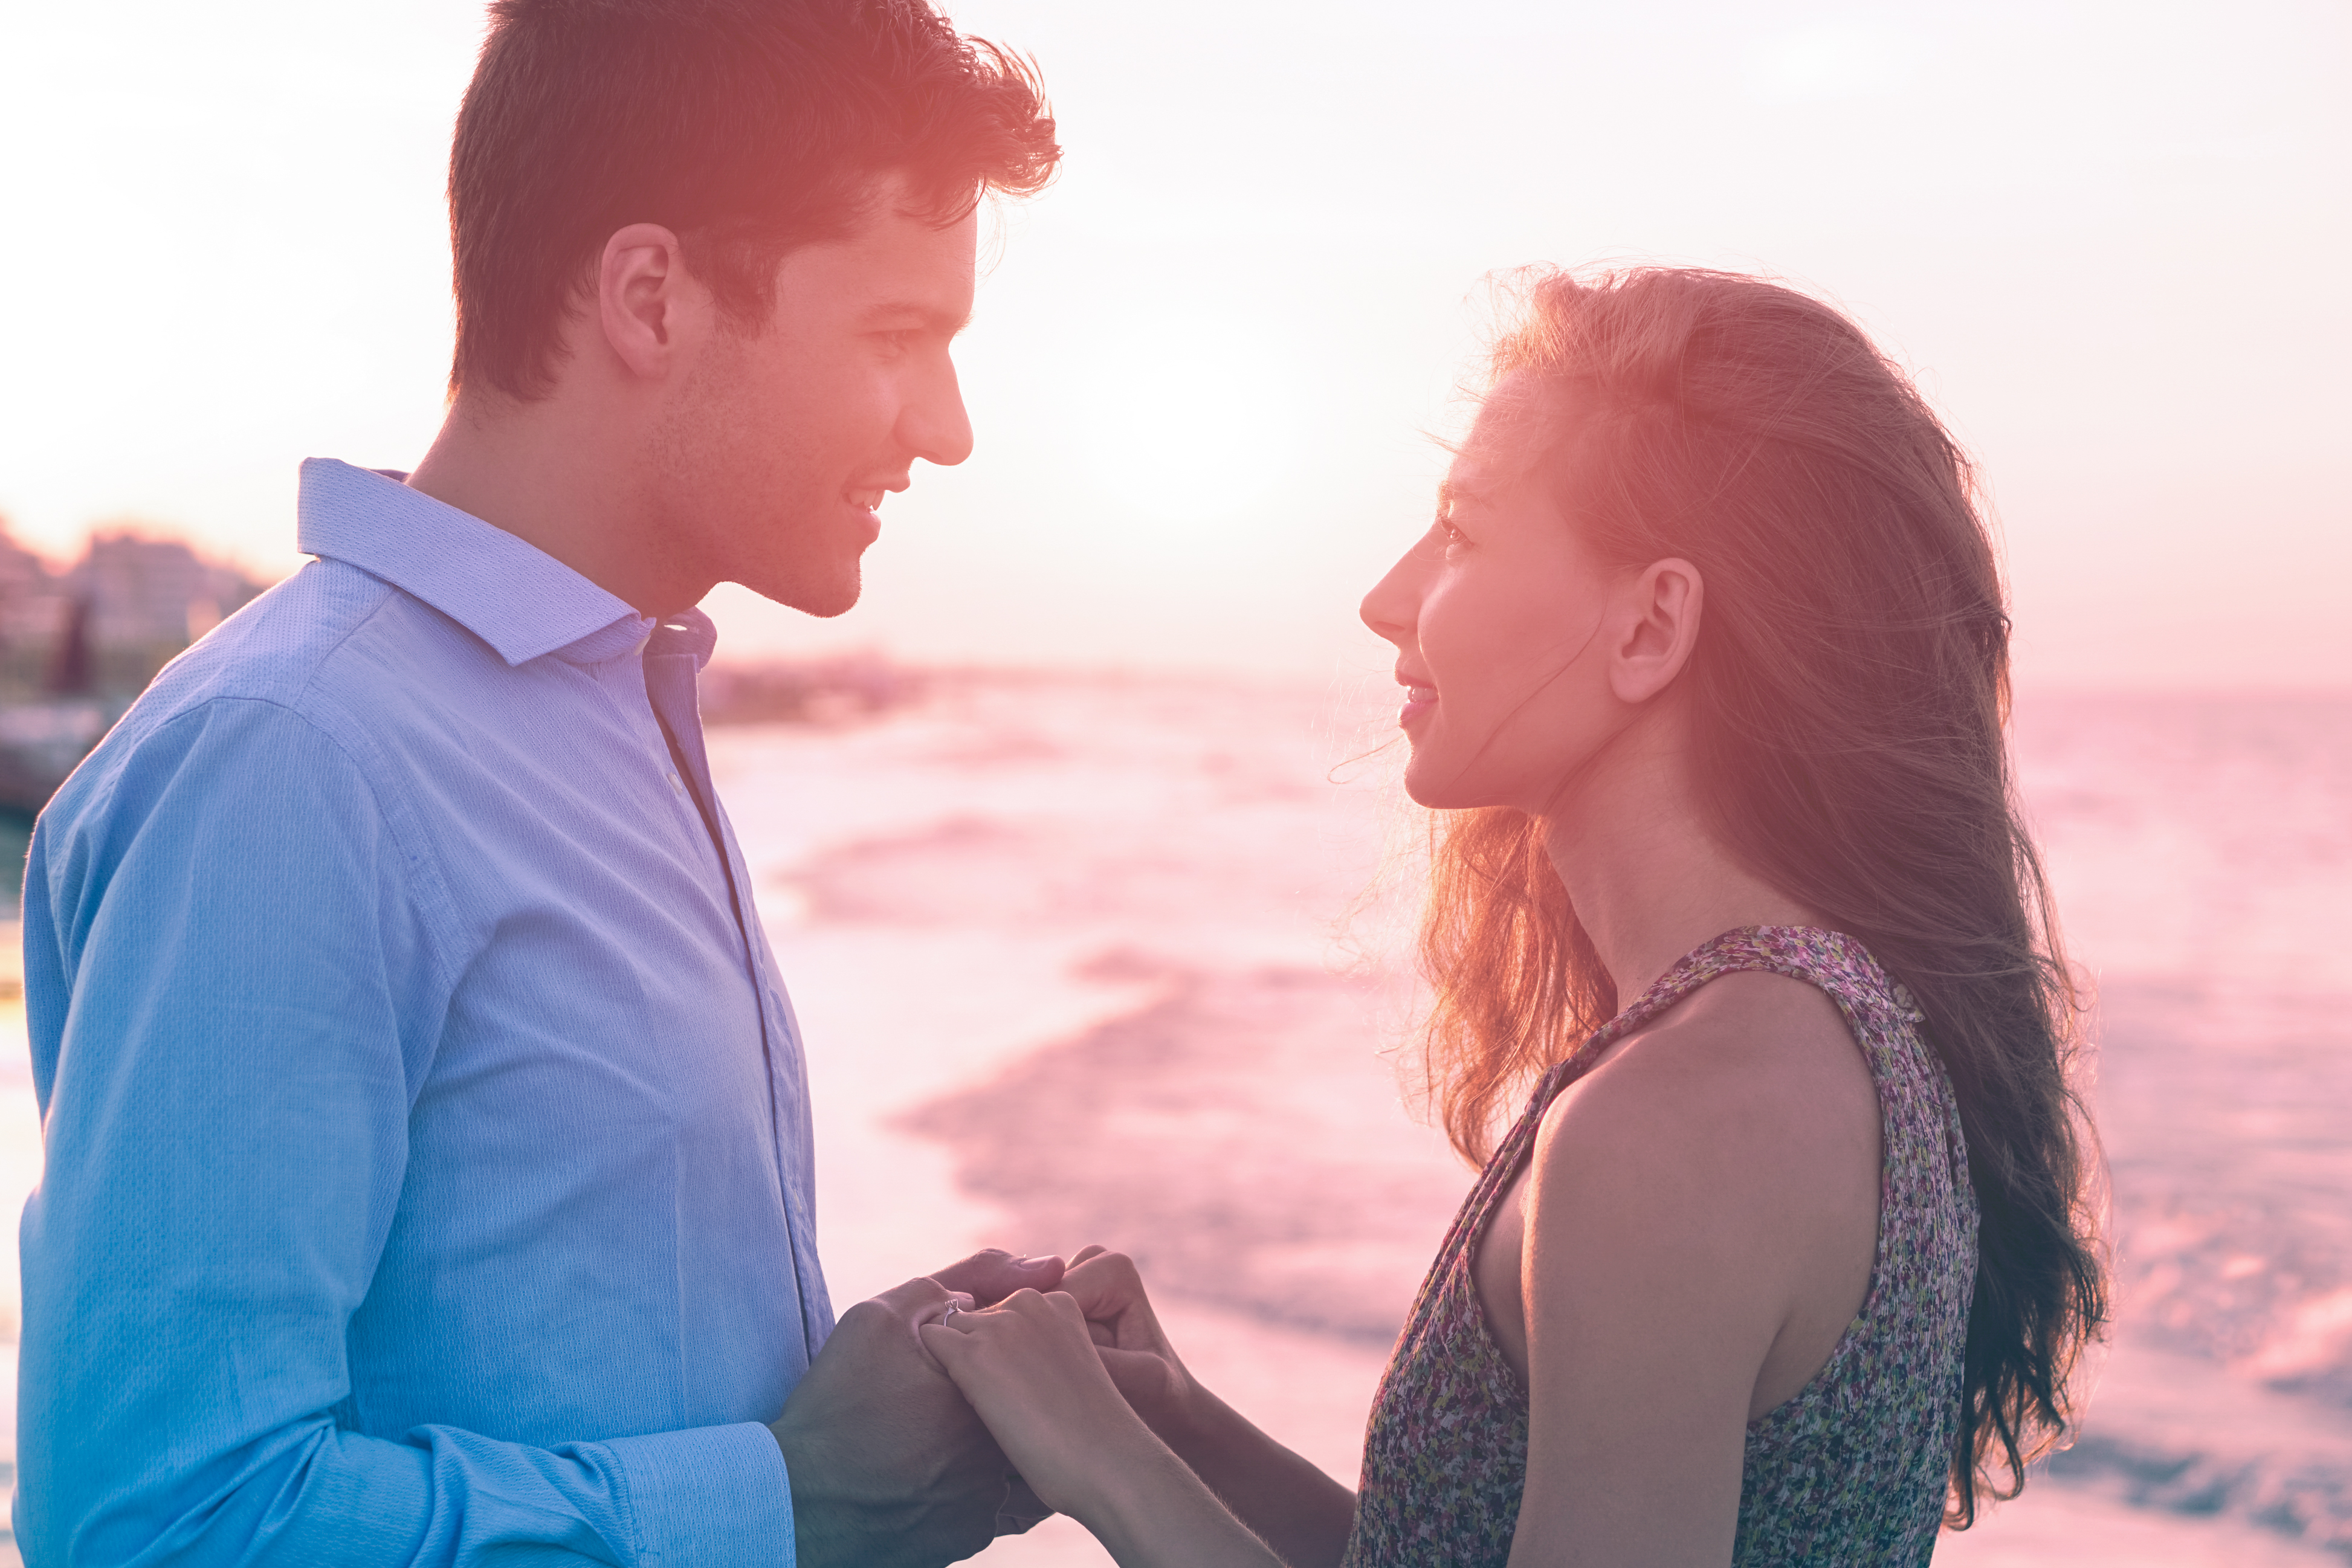 Choosing our Relationships, article for couples by Lair Torrent LMFT